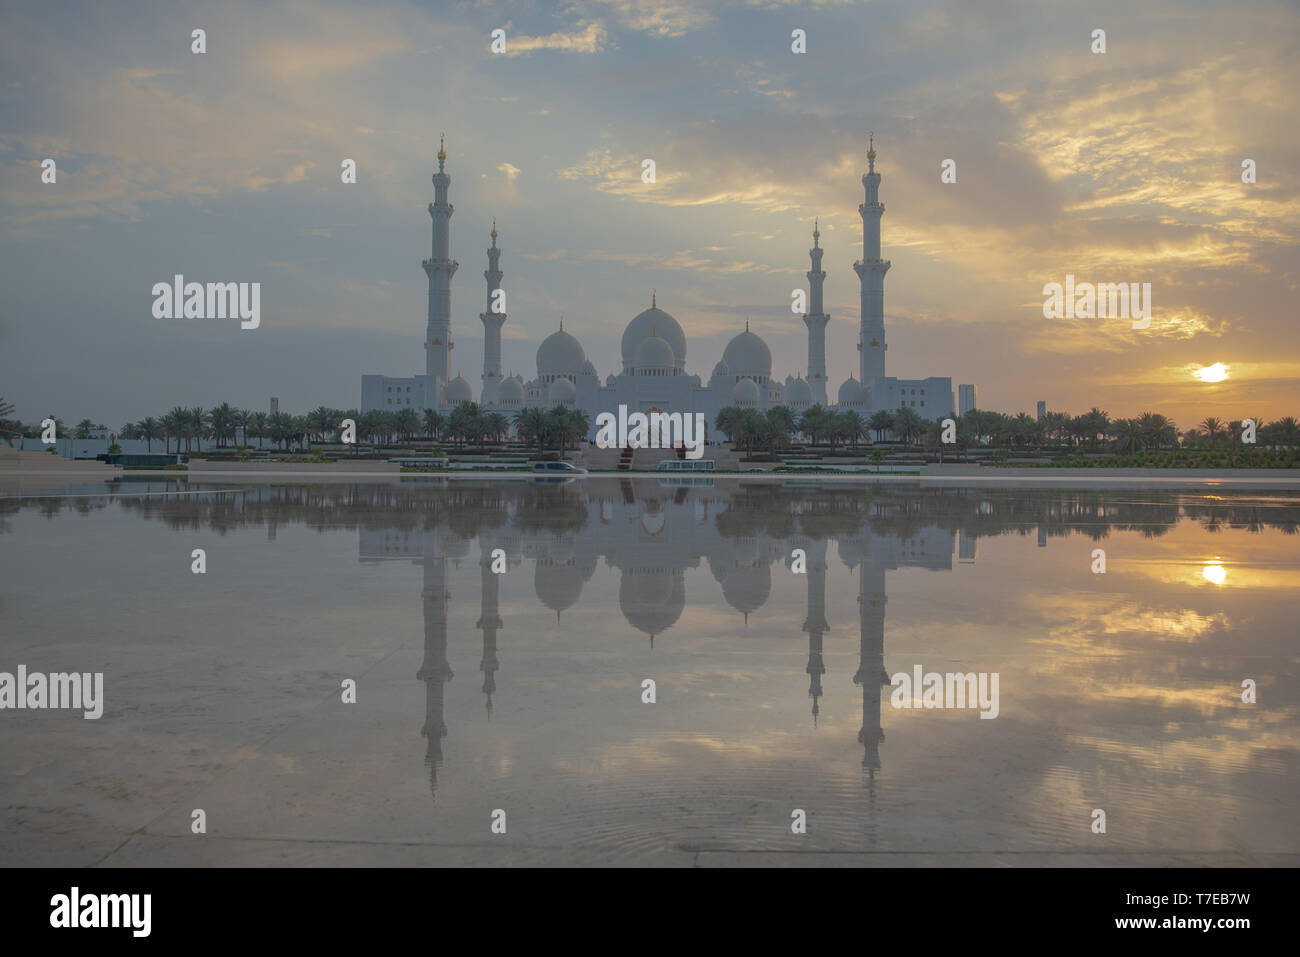 Axial view of the Great Mosque of Abu Dhabi at sunset with reflection over a water mirror with nobody, United Arab Emirate Stock Photo